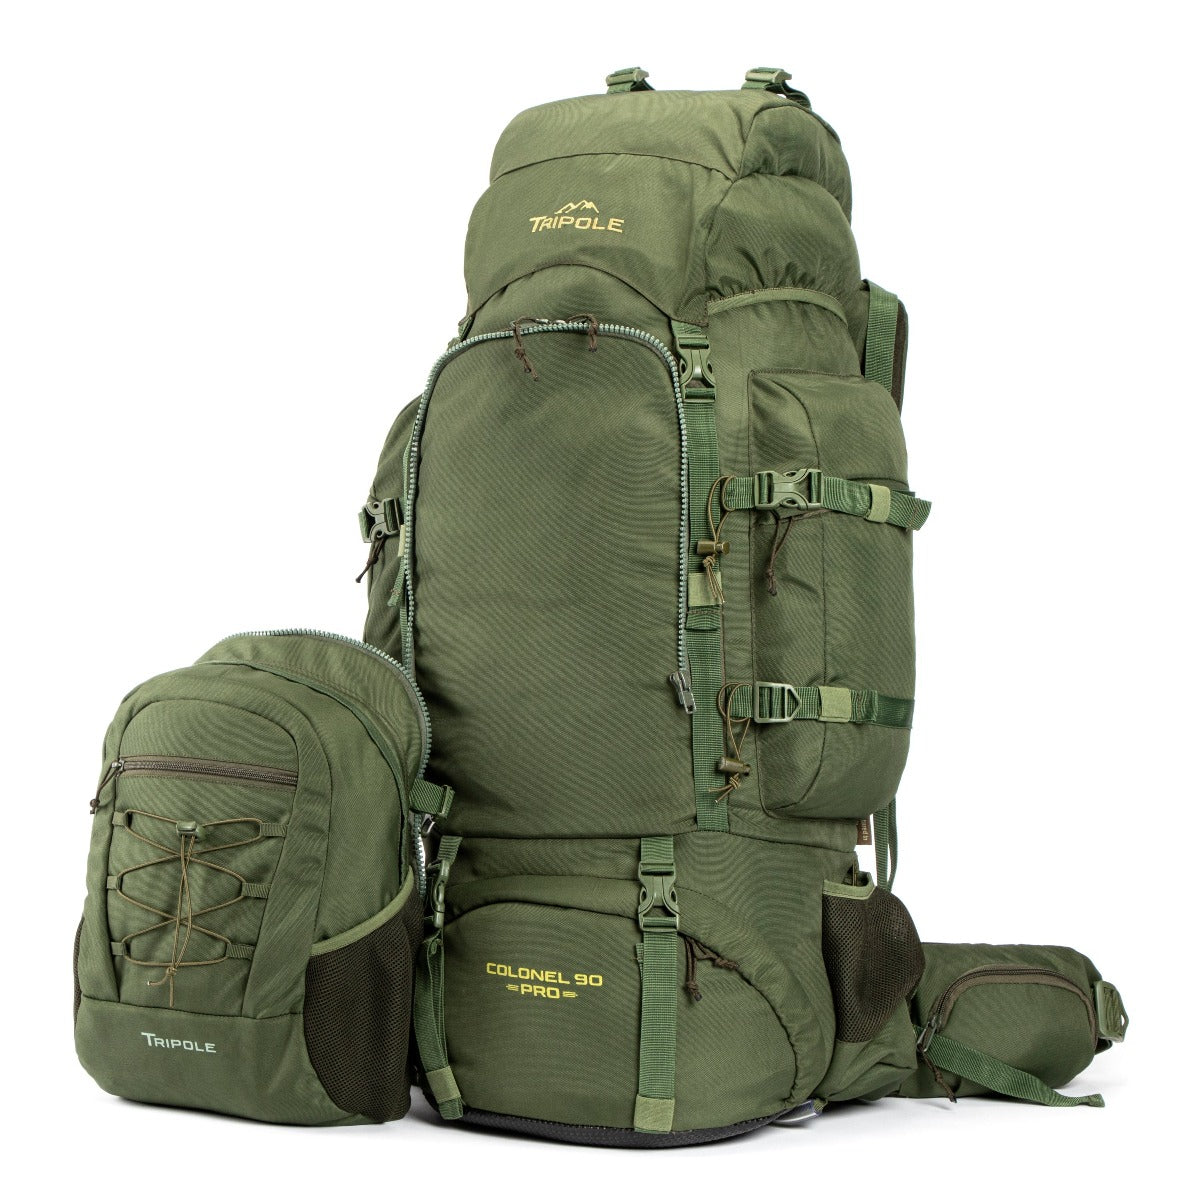 Colonel Pro Metal Frame Rucksack + Detachable Bag & Rain Cover - 90 Litres - Army Green 6